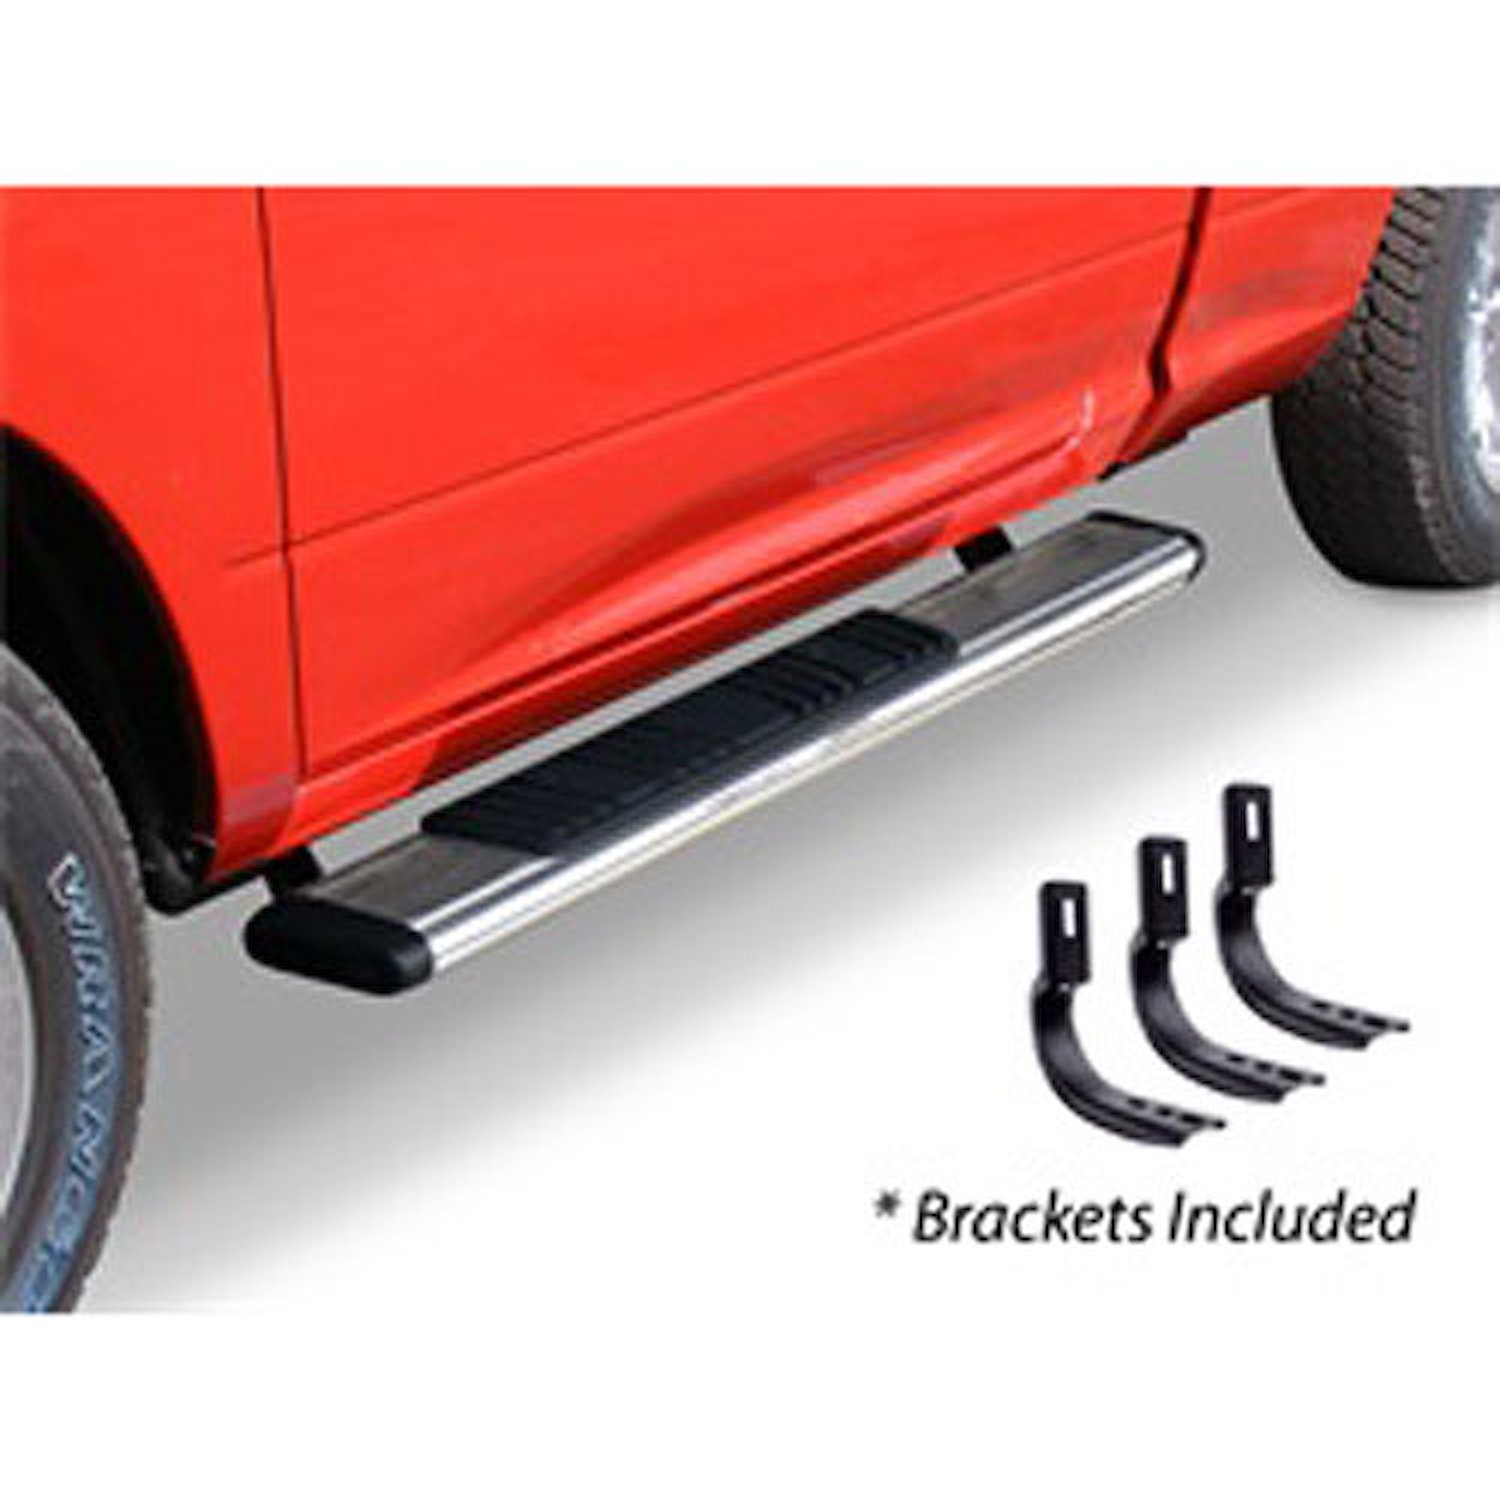 5" OE Xtreme Low Profile SideSteps Kit 2004-14 Ford F-150